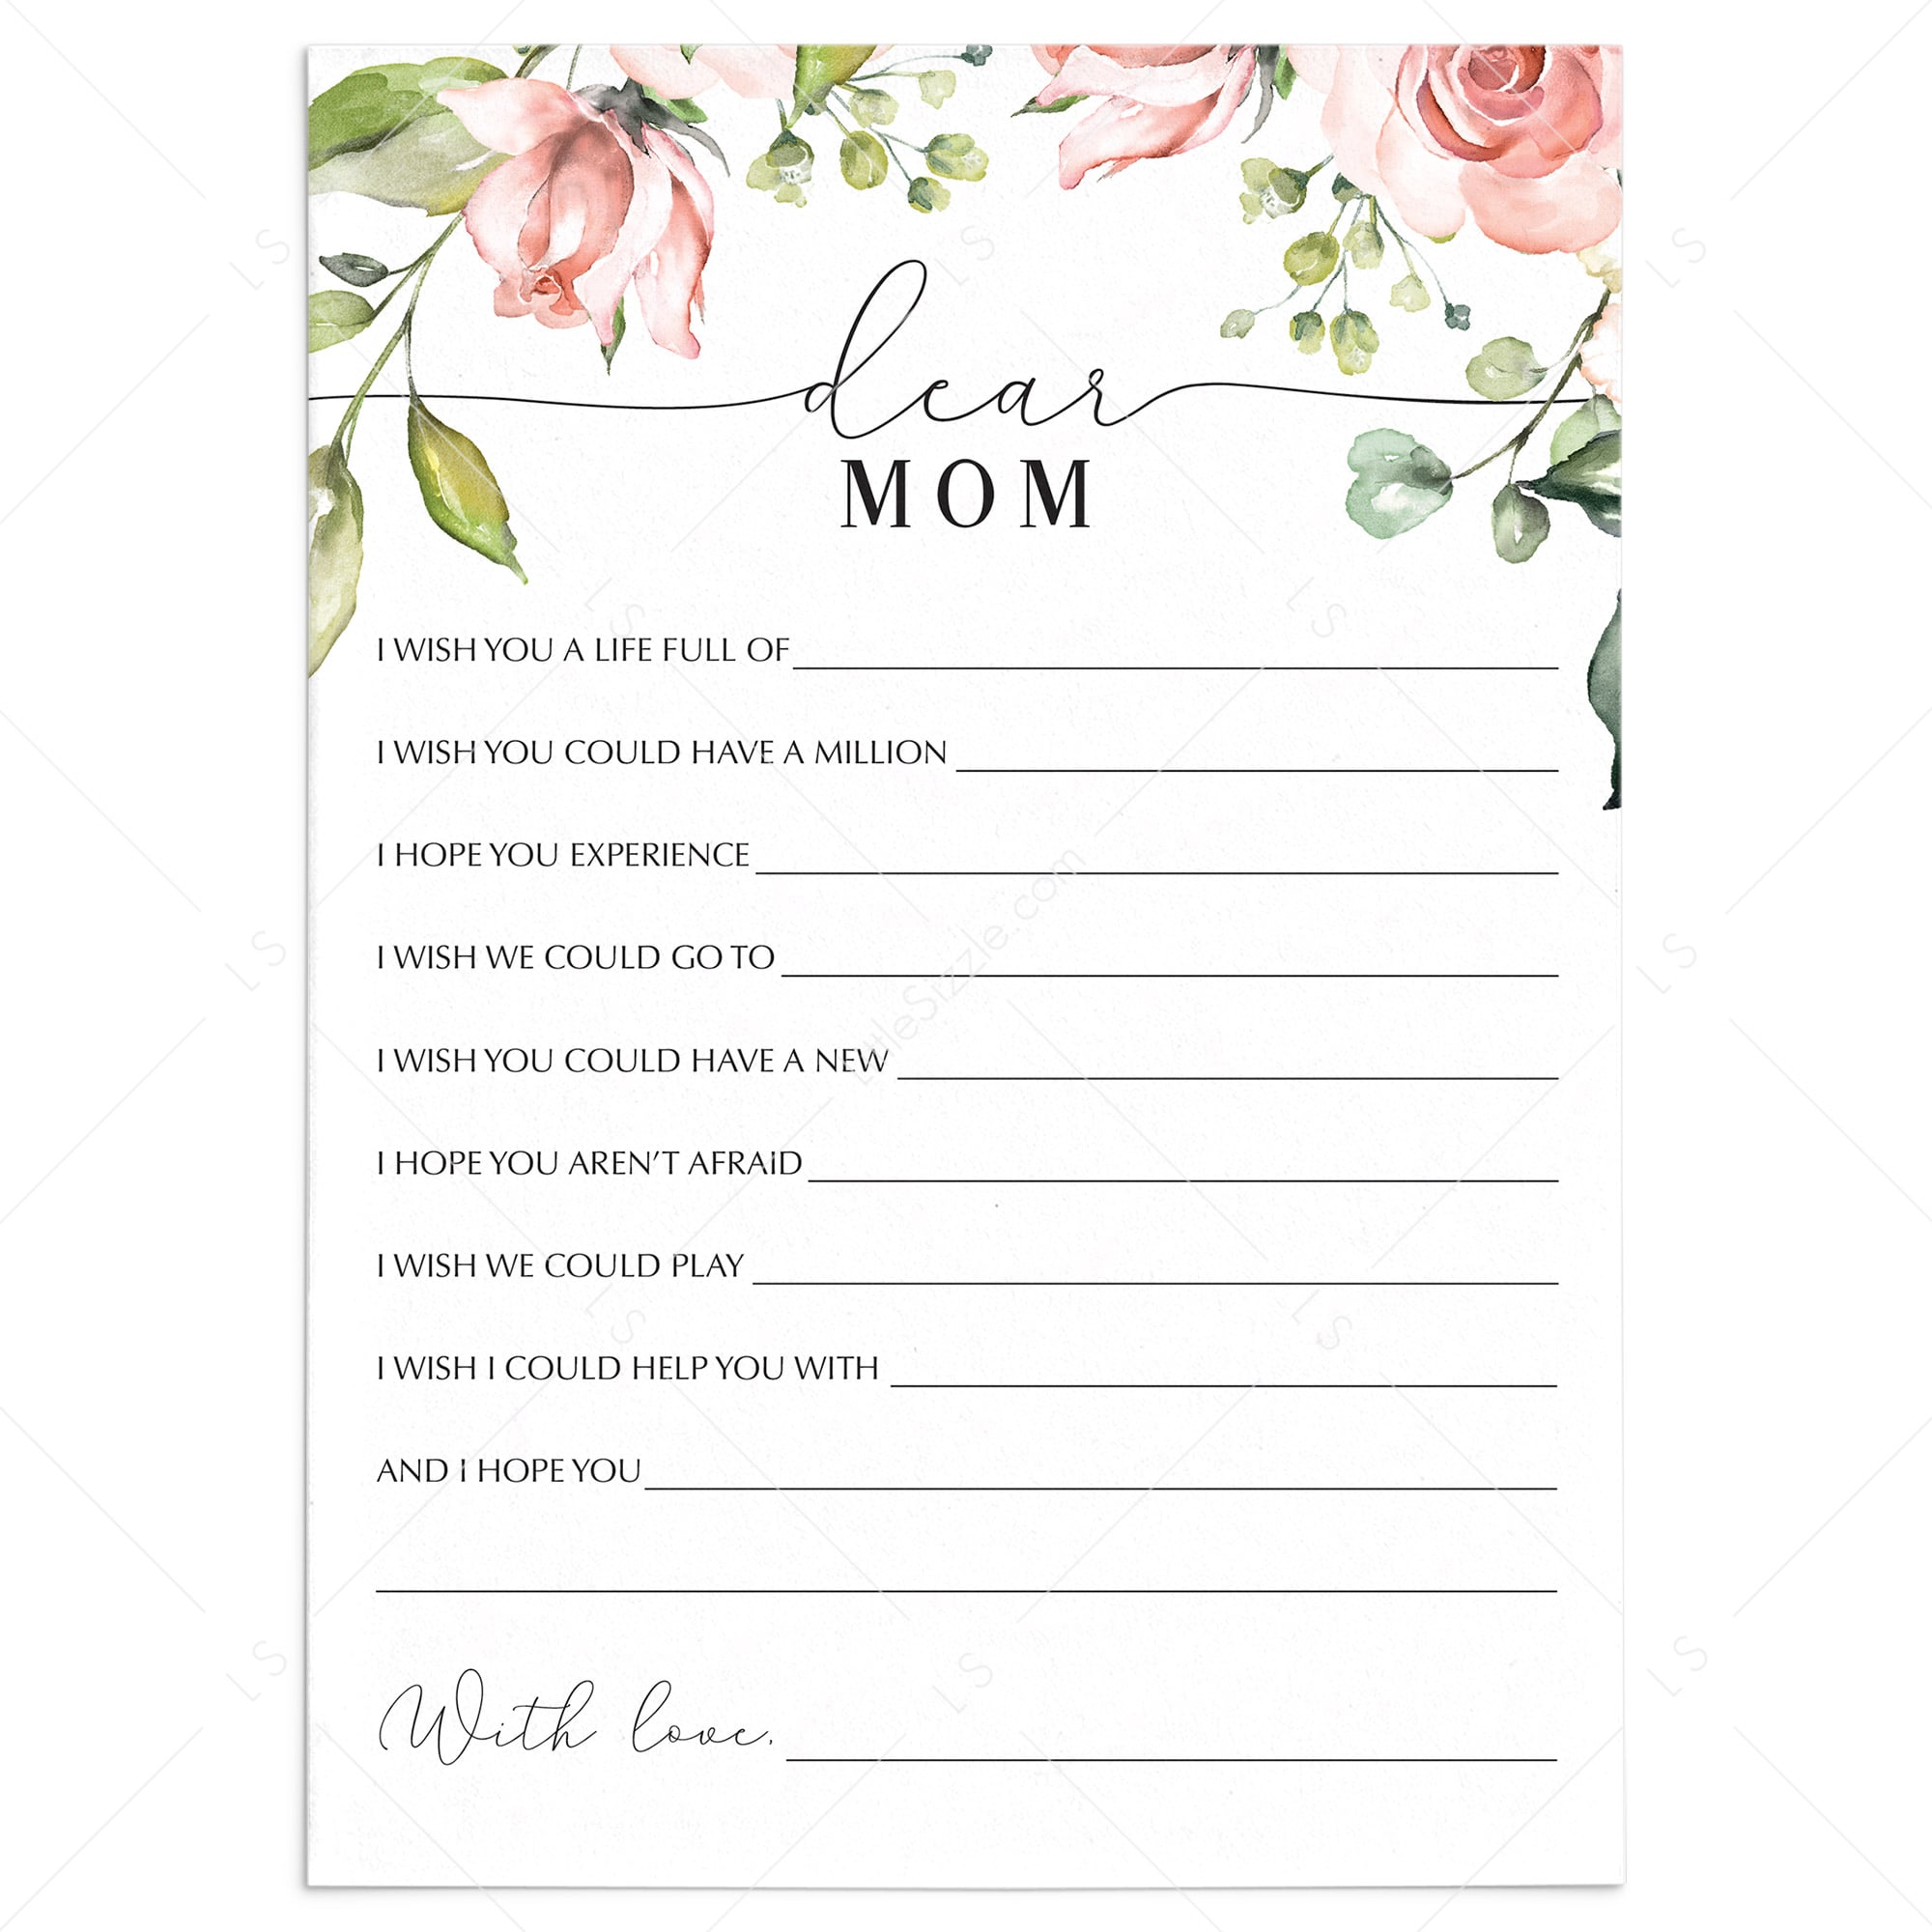 Happy Mother's Day 2023 - Meaningful gifts for your dear mother